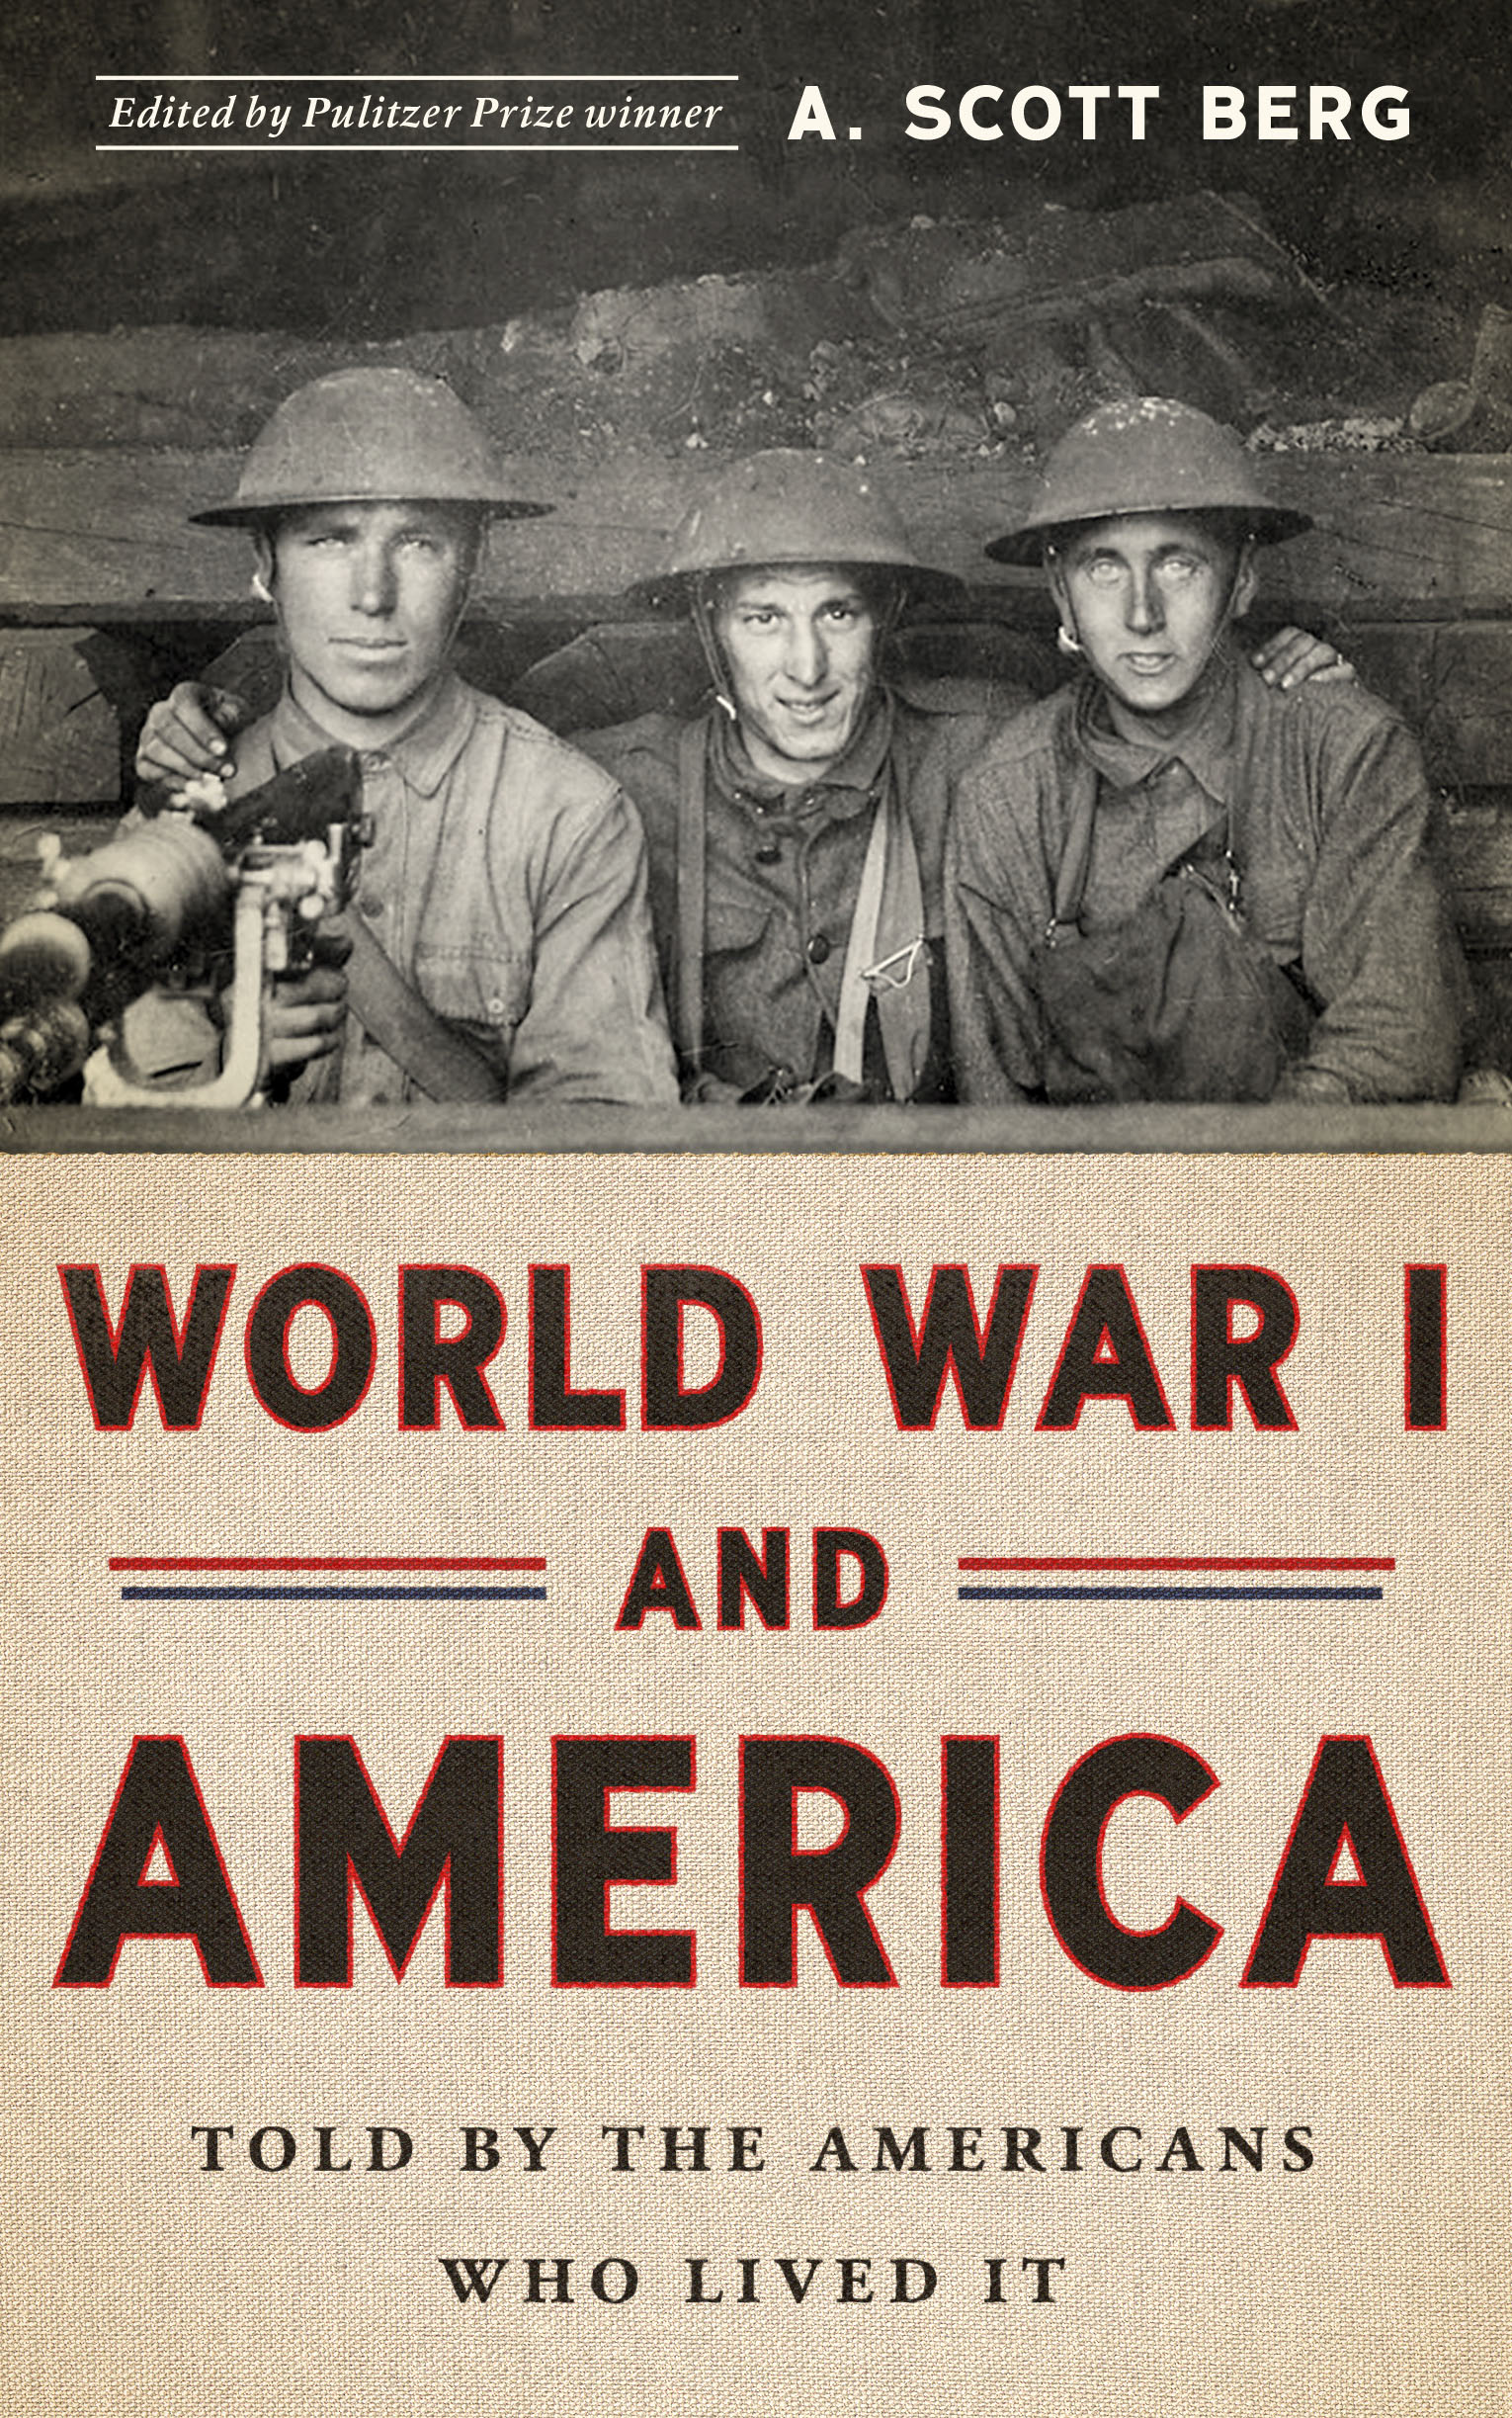 W ORLD W AR I AND A MERICA TOLD BY THE AMERICANS WHO LIVED IT A Scott Berg - photo 1